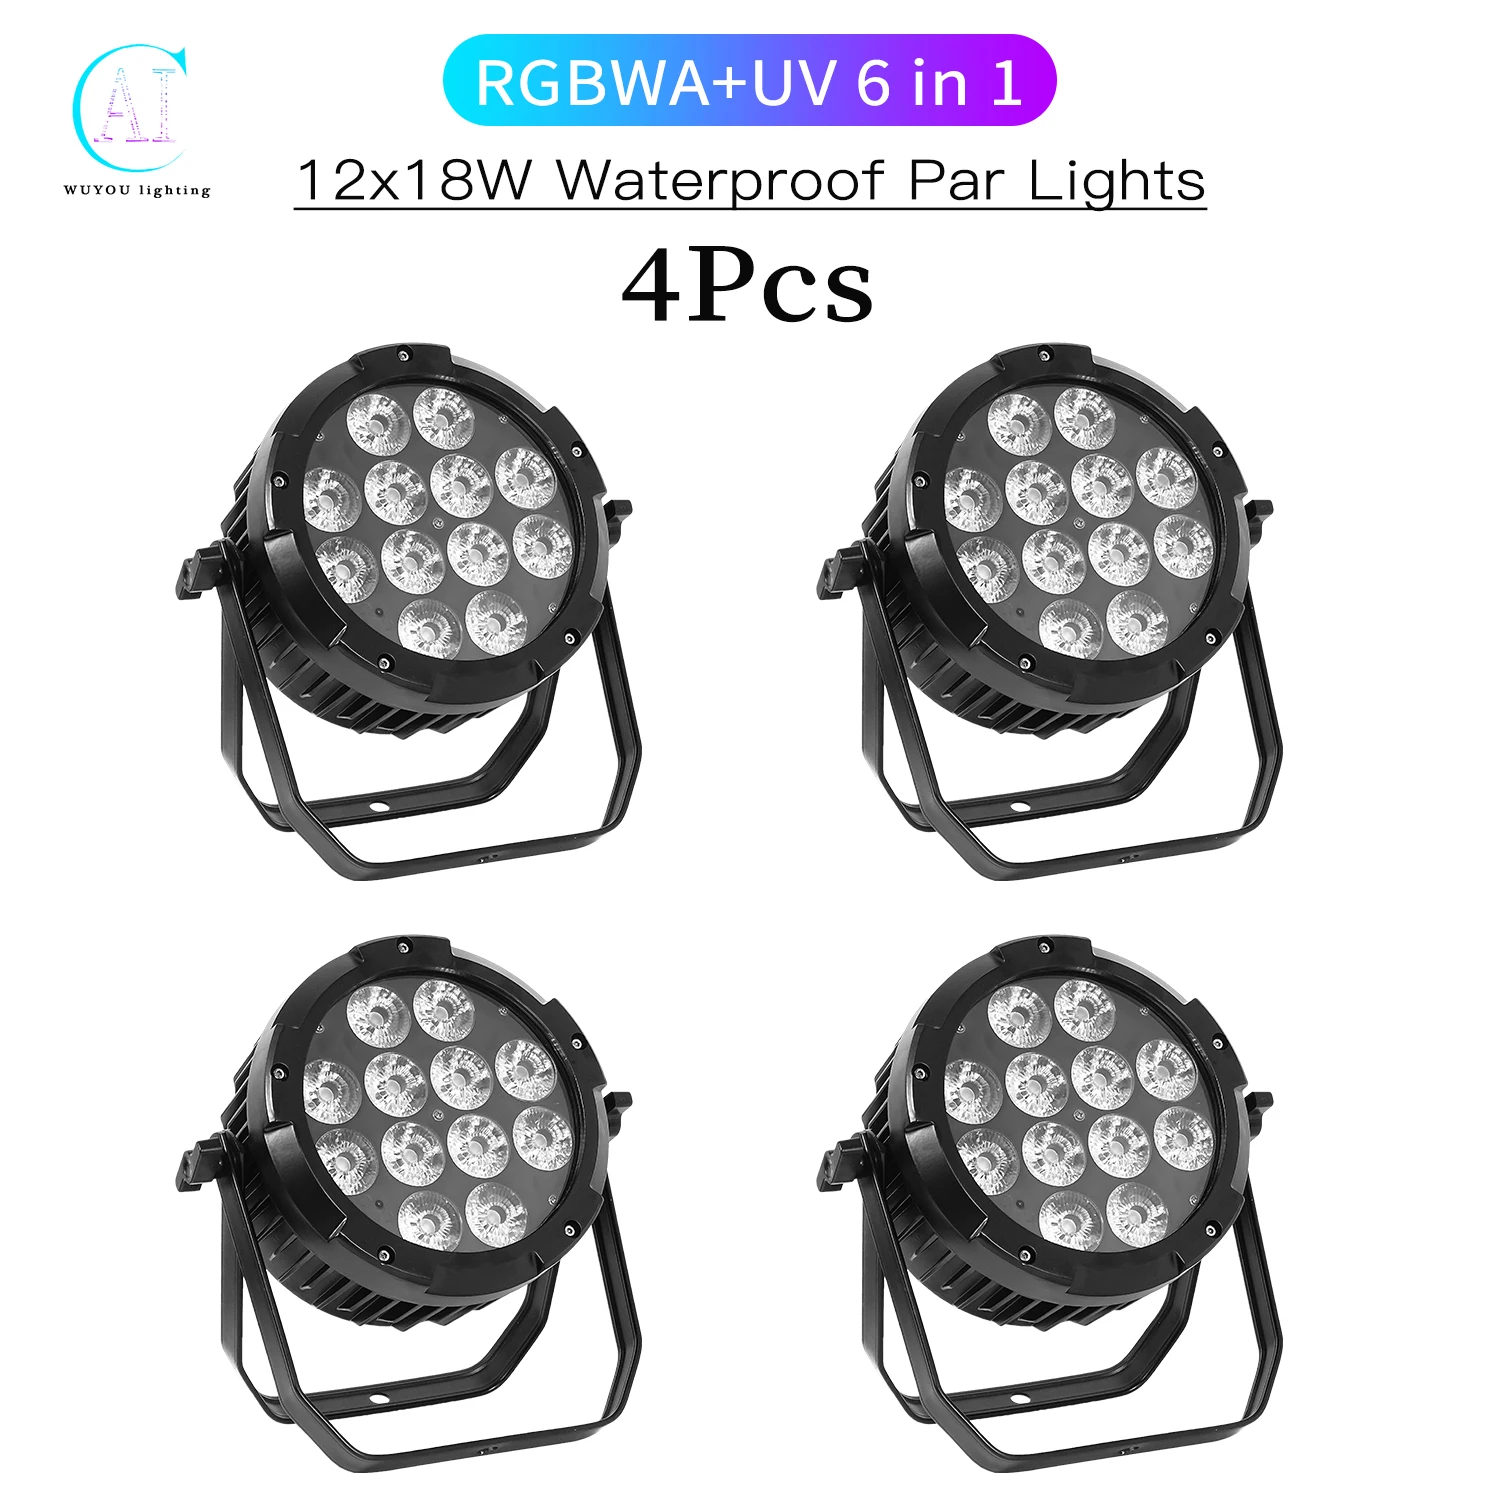 

4Pcs/Lots LED Waterproof Battery Par Light 12x18W RGBWA+ UV 6 in 1 RC Stage Light DJ Disco Outdoor Show Stage Lighting